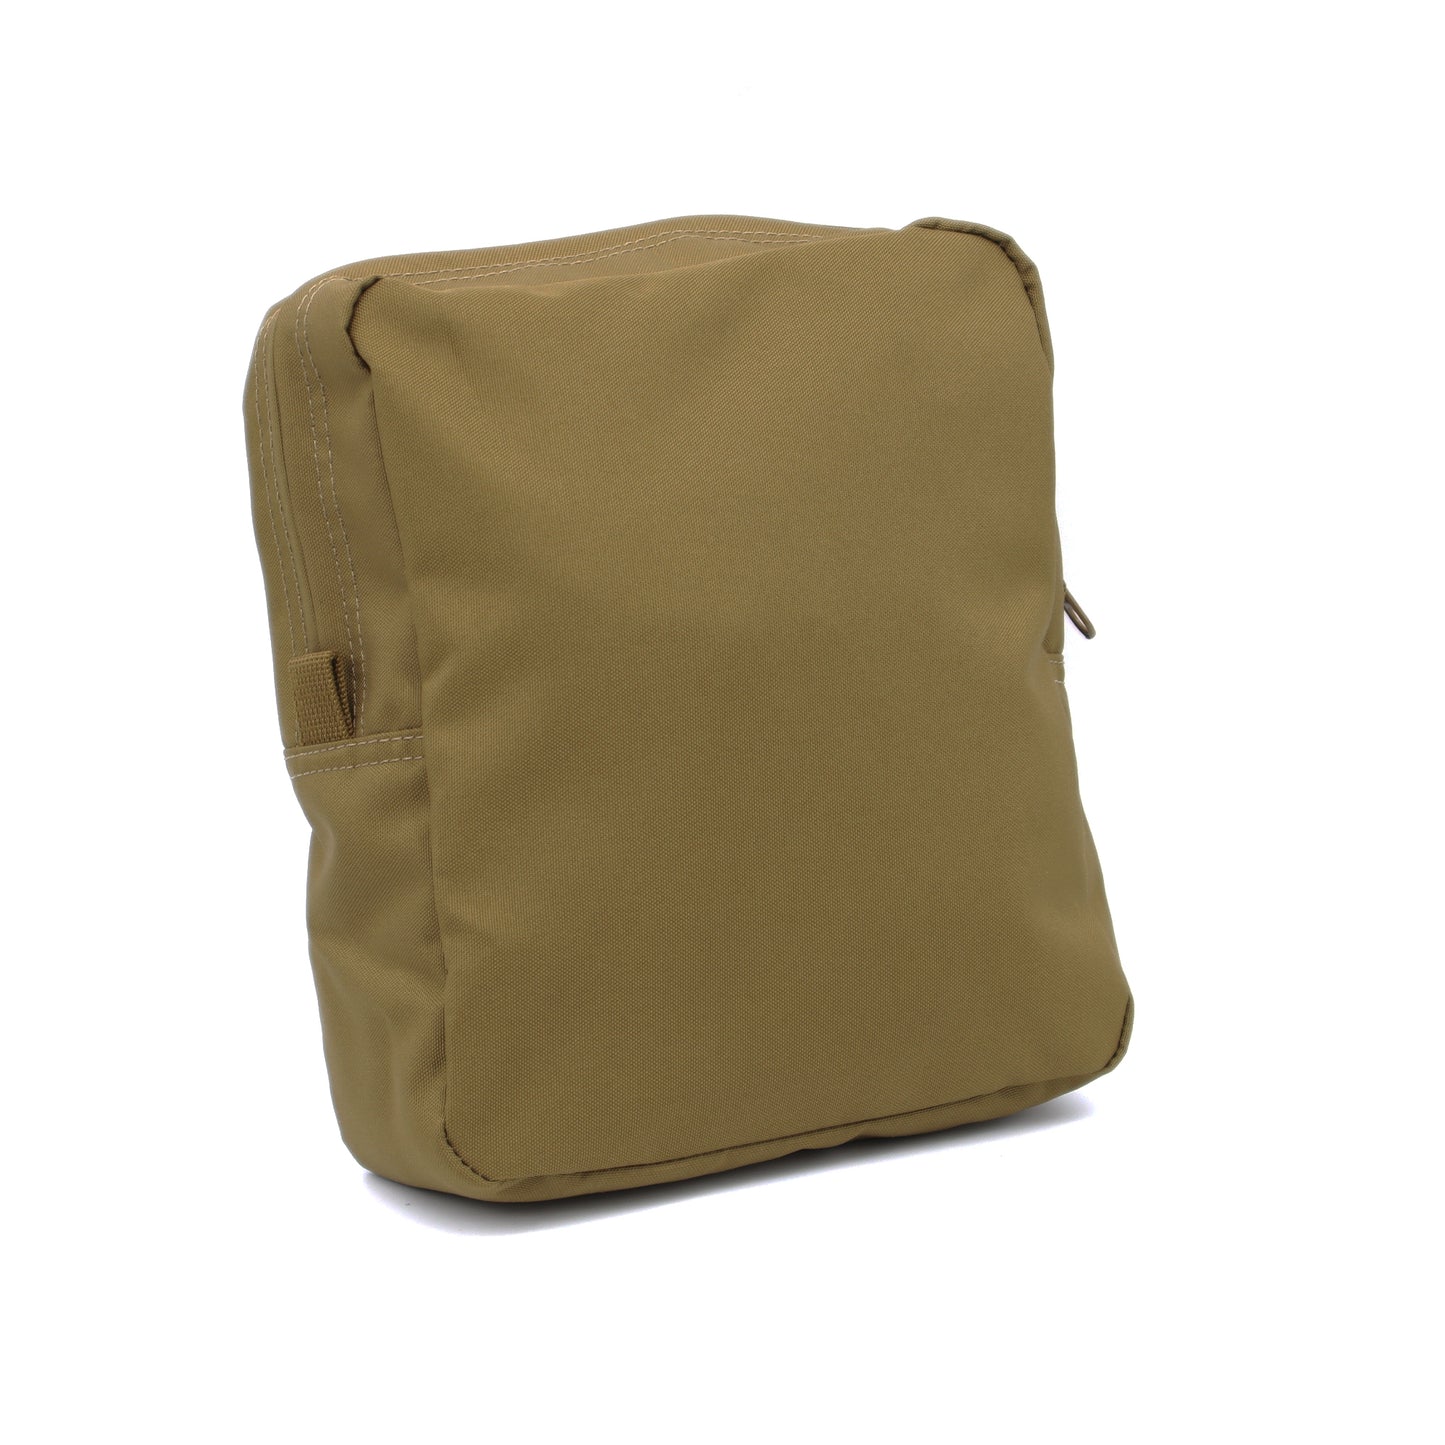 TOP GEAR #286 MOLLE TACTICAL POUCH